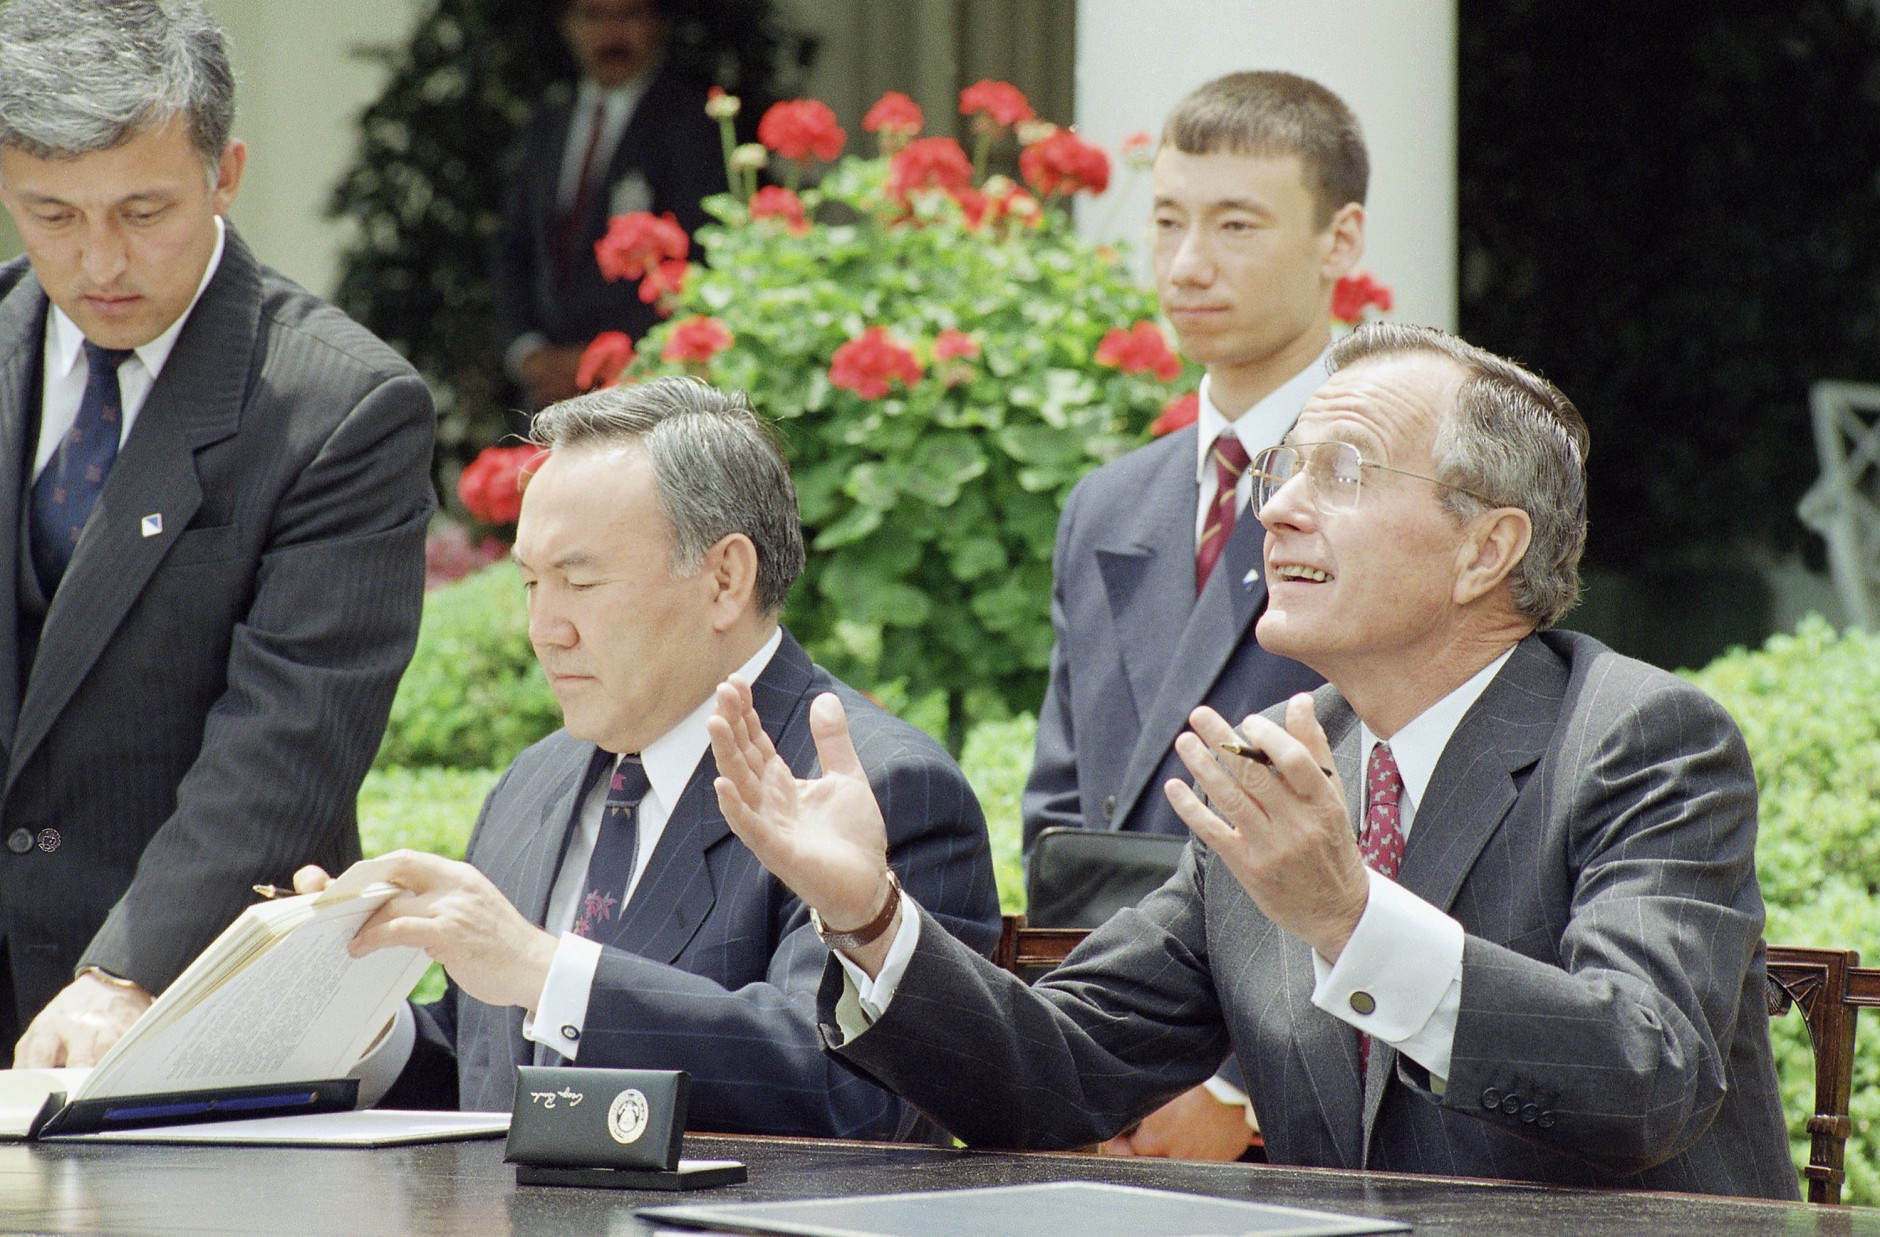 U.S. President George H. Bush gestures while President Nursultan Nazarbayev of Kazakhstan reads his papers after signing a nonproliferation treaty in the Rose Garden of the White house in Washington, Tuesday, May 19, 1992. President Nazarbayev said Tuesday that his country will adhere to agreements barring the transfer of nuclear weapons and their technology. (AP Photo/Ron Edmonds) 